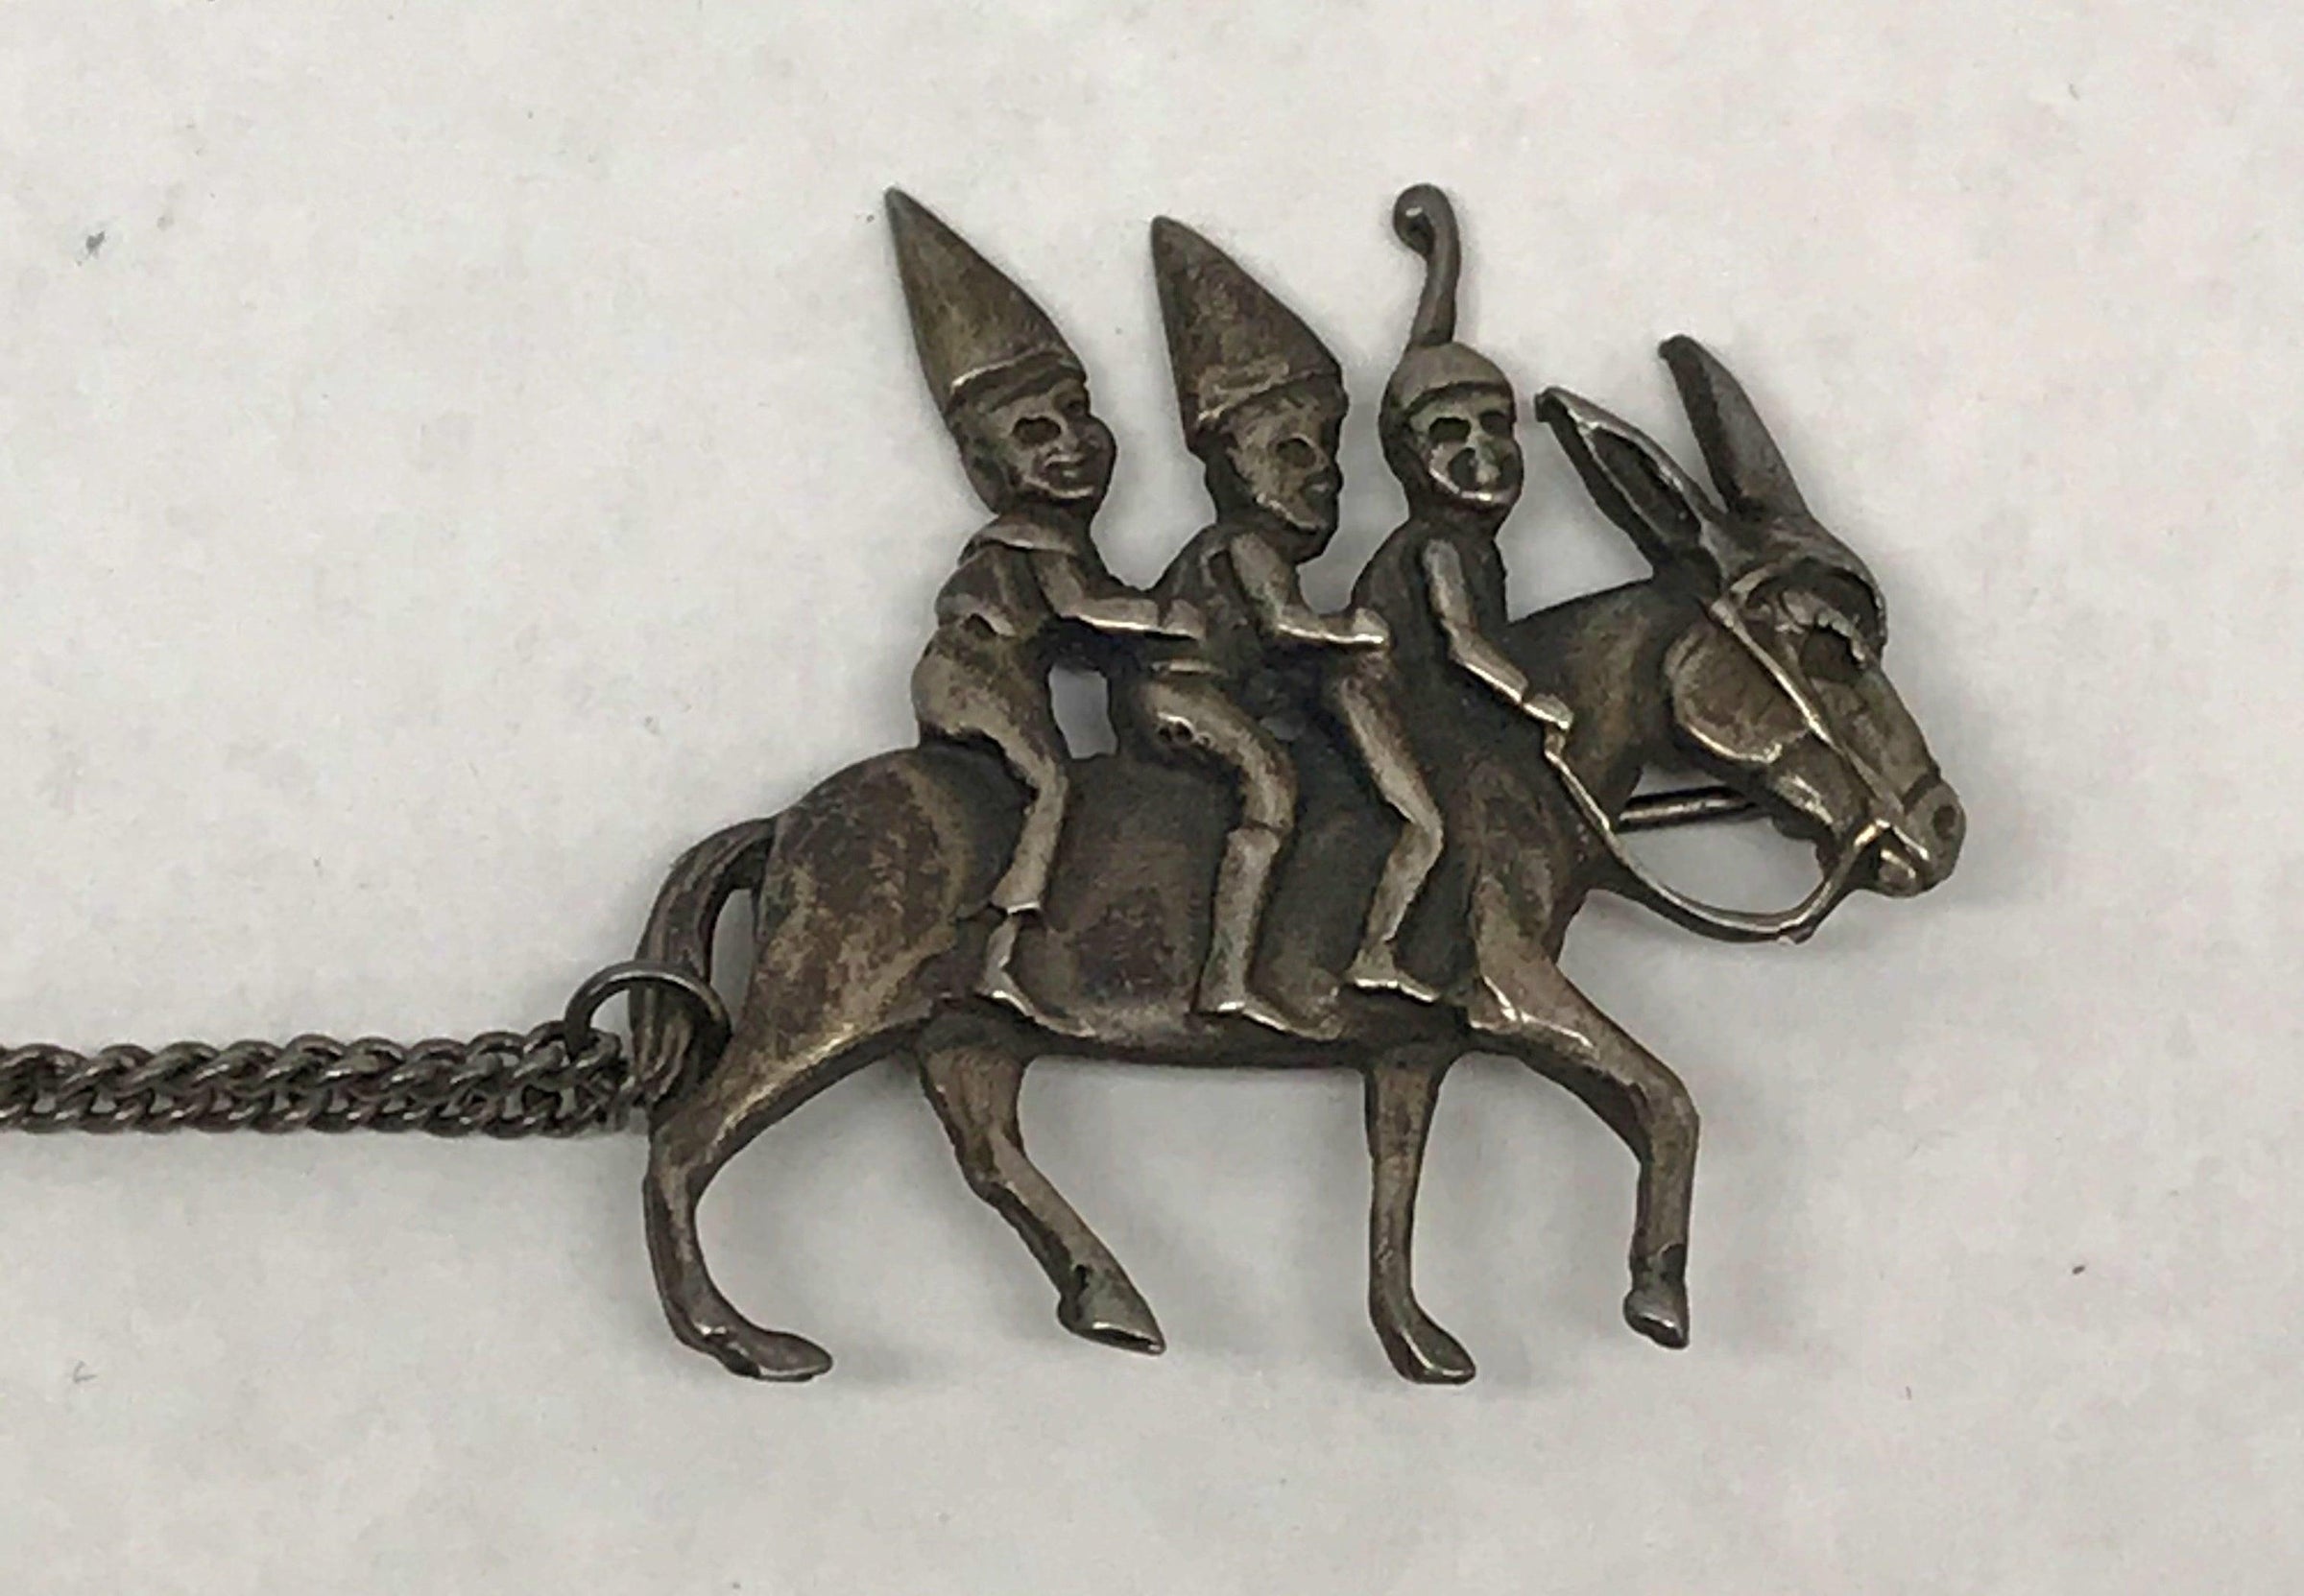 Rare Three Elves Or Gnomes Riding A Donkey Sterling Silver Brooch Pins - Hers and His Treasures